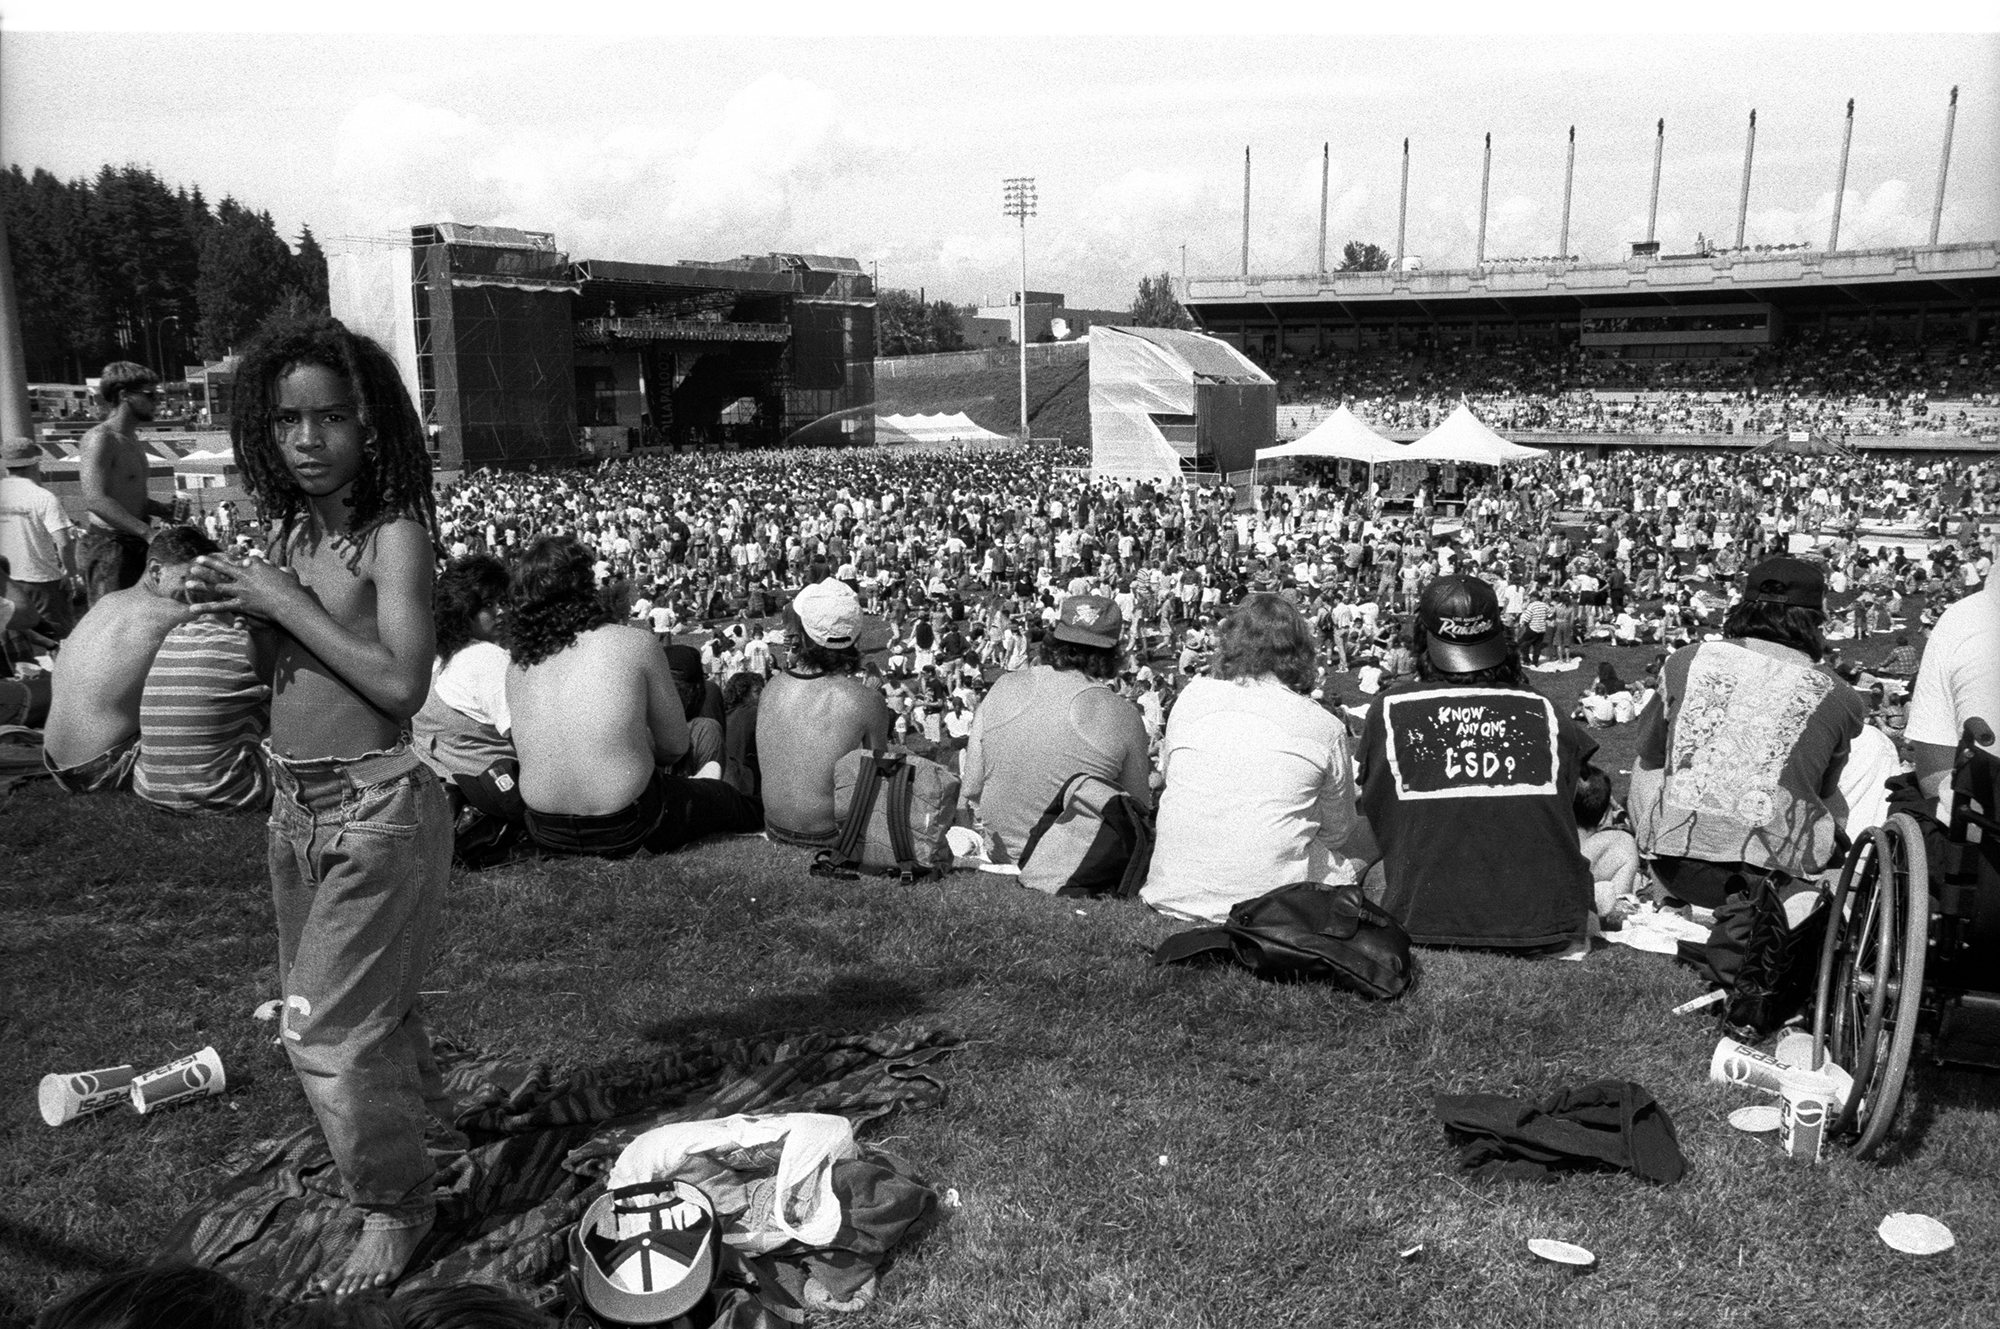 Lollapalooza in Vancouver, Canada, on June 18, 1993.